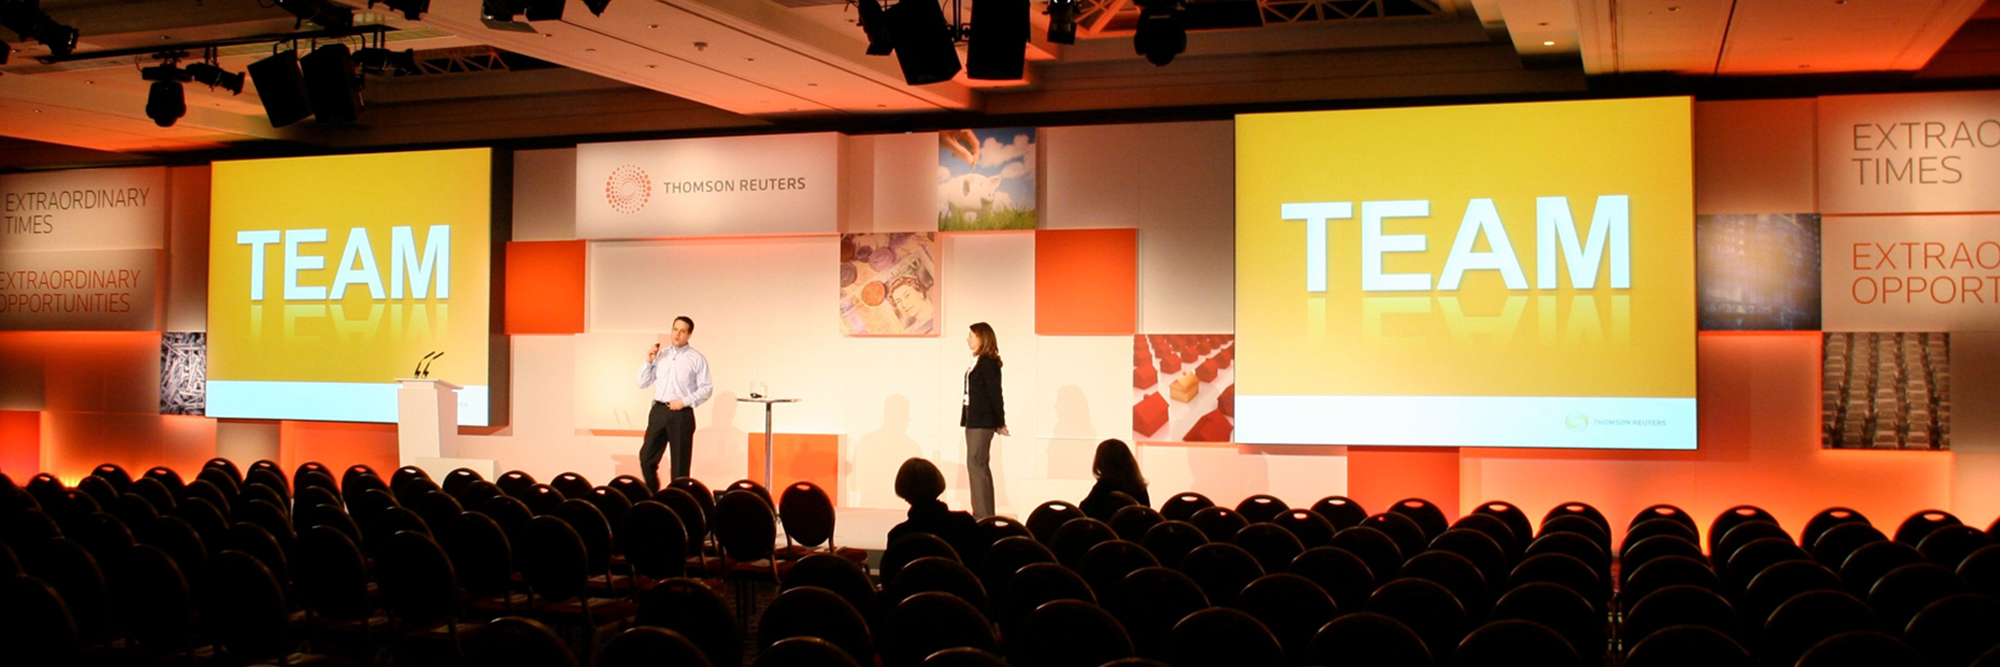 THOMSON REUTERS CONFERENCE